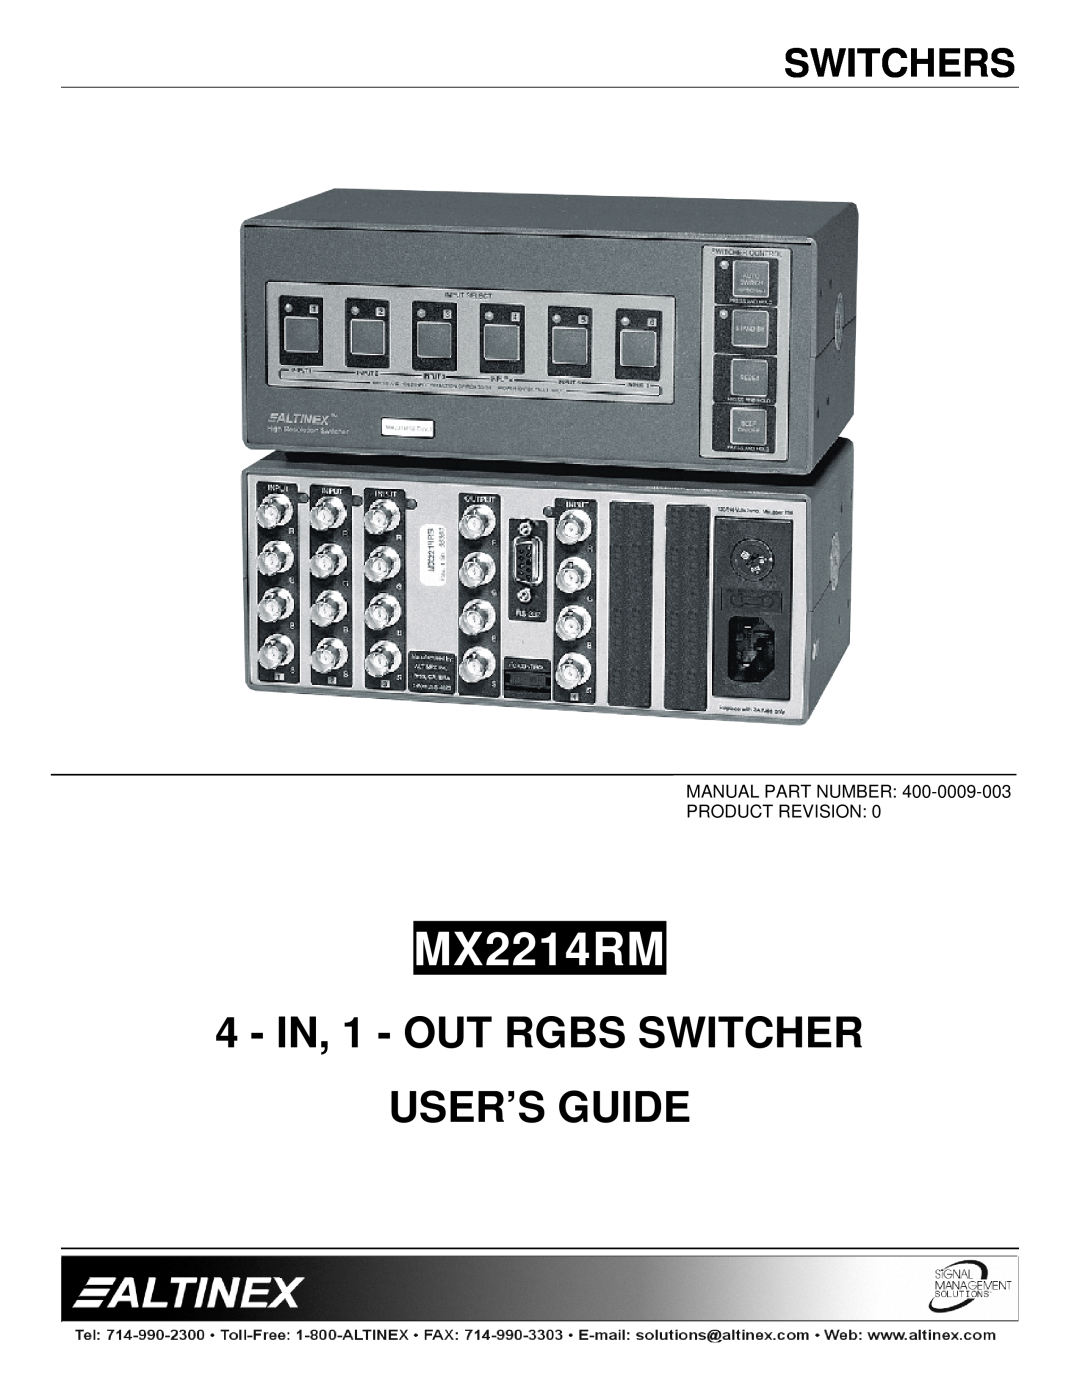 Altinex MX2214RM manual Switchers, IN, 1 - OUT RGBS SWITCHER USER’S GUIDE, Manual Part Number Product Revision 